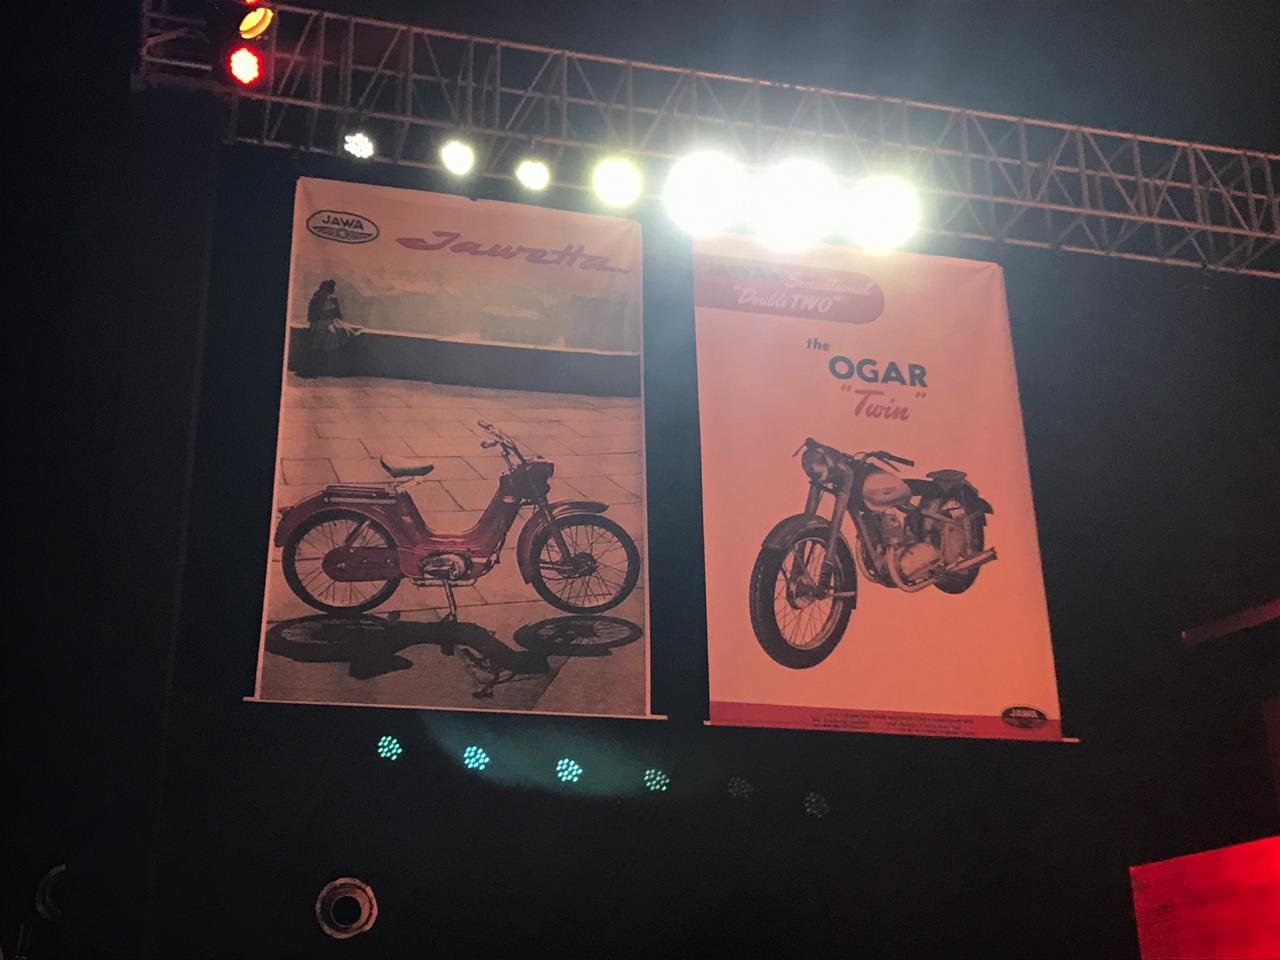 <p>Some of the posters of old Jawa&nbsp;Motorcycles on display at the launch event here to evoke nostalgia.&nbsp;</p>